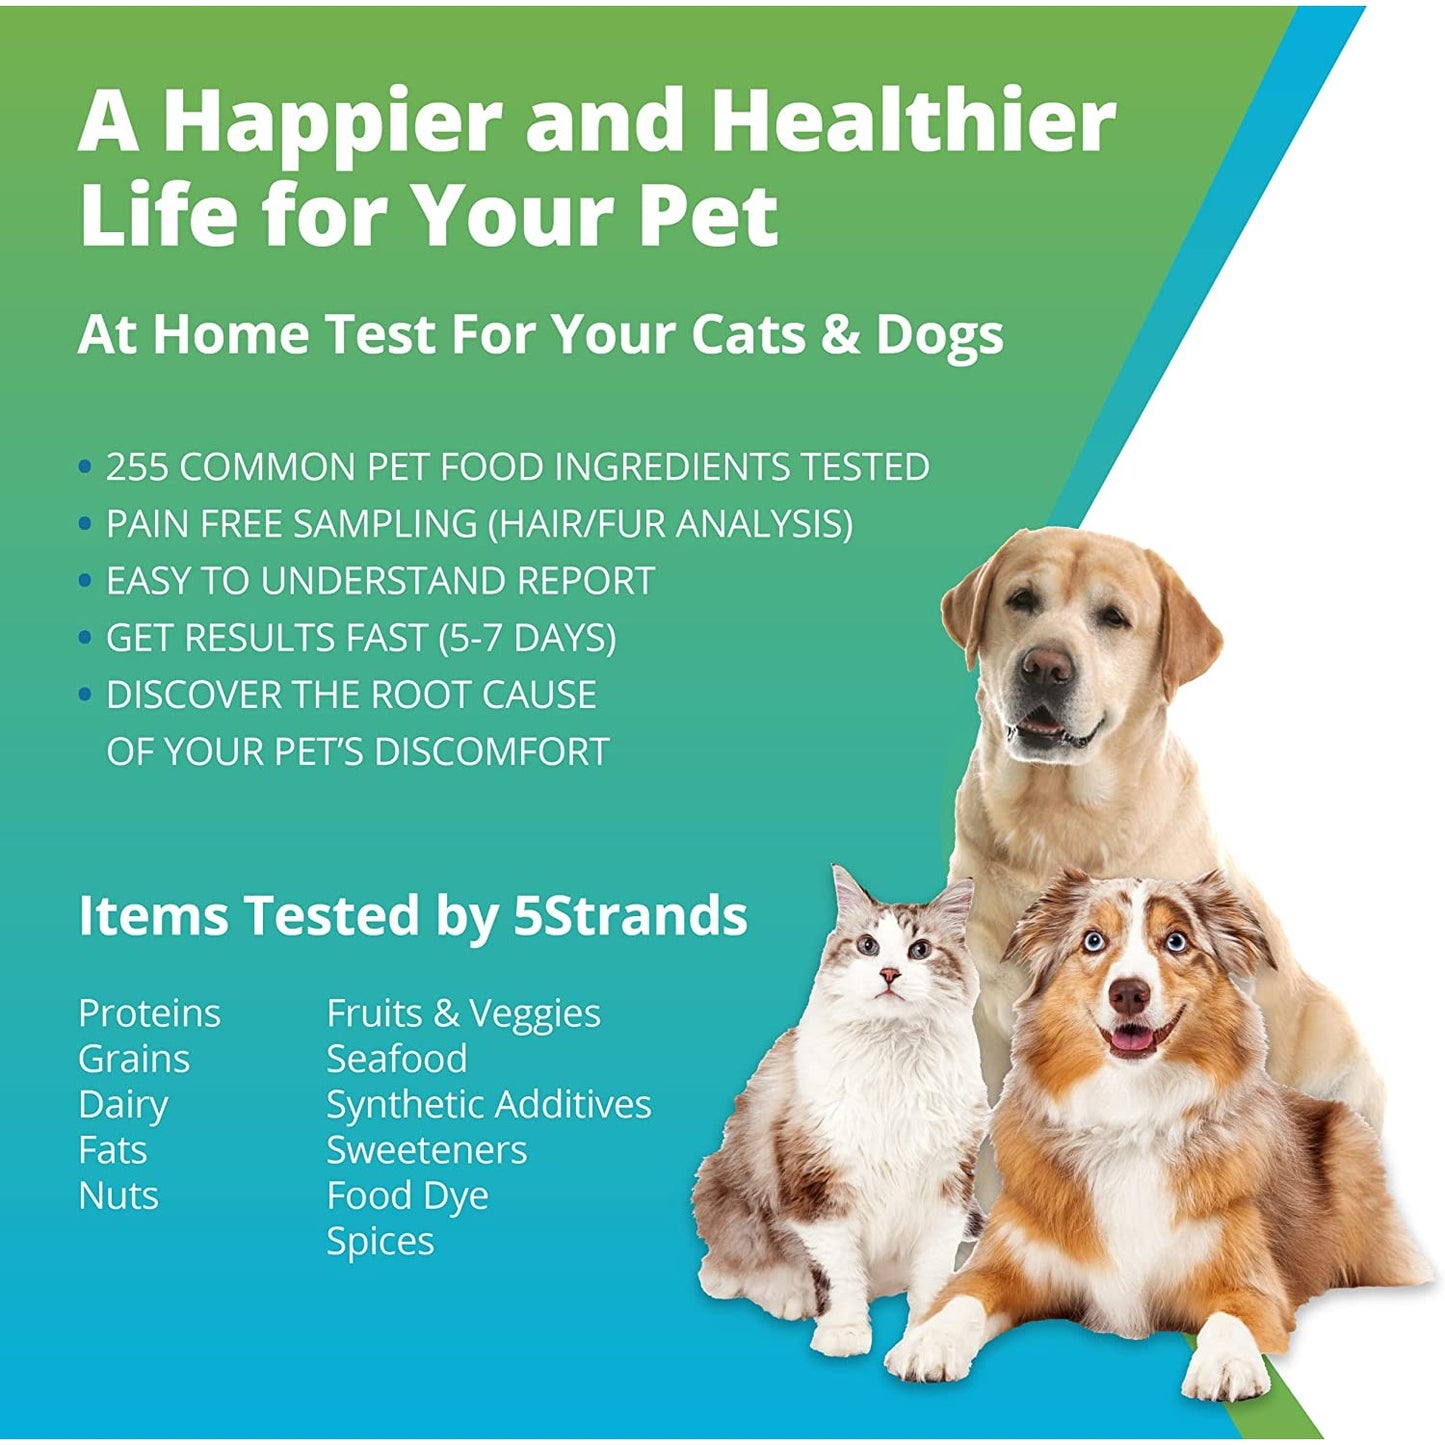 Information about a pet food intolerance test for cats and dogs.